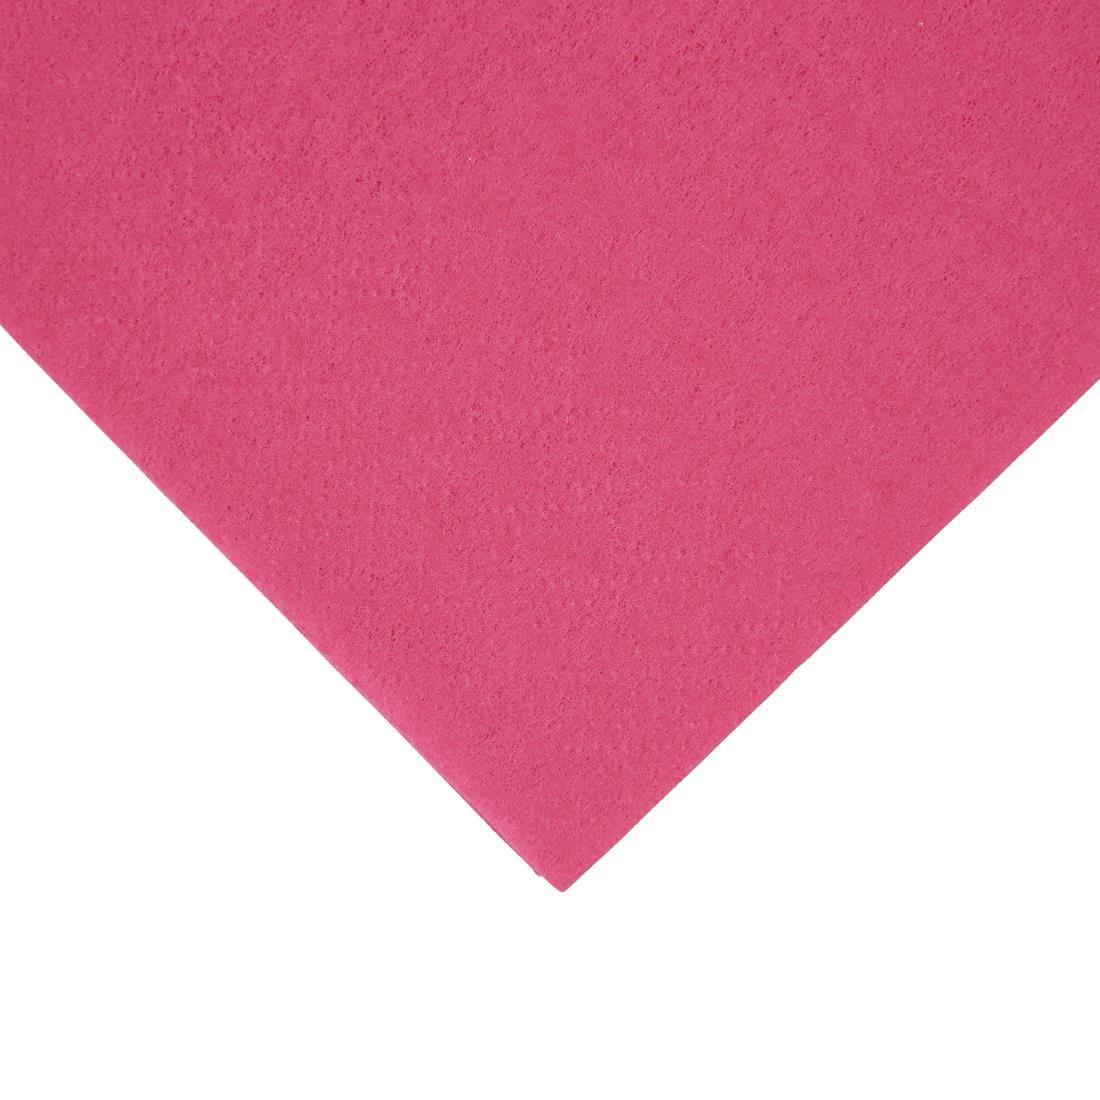 Fiesta Recyclable Lunch Napkin Pink 33x33cm 2ply 1/8 Fold (Pack of 2000) - FE230  - 2